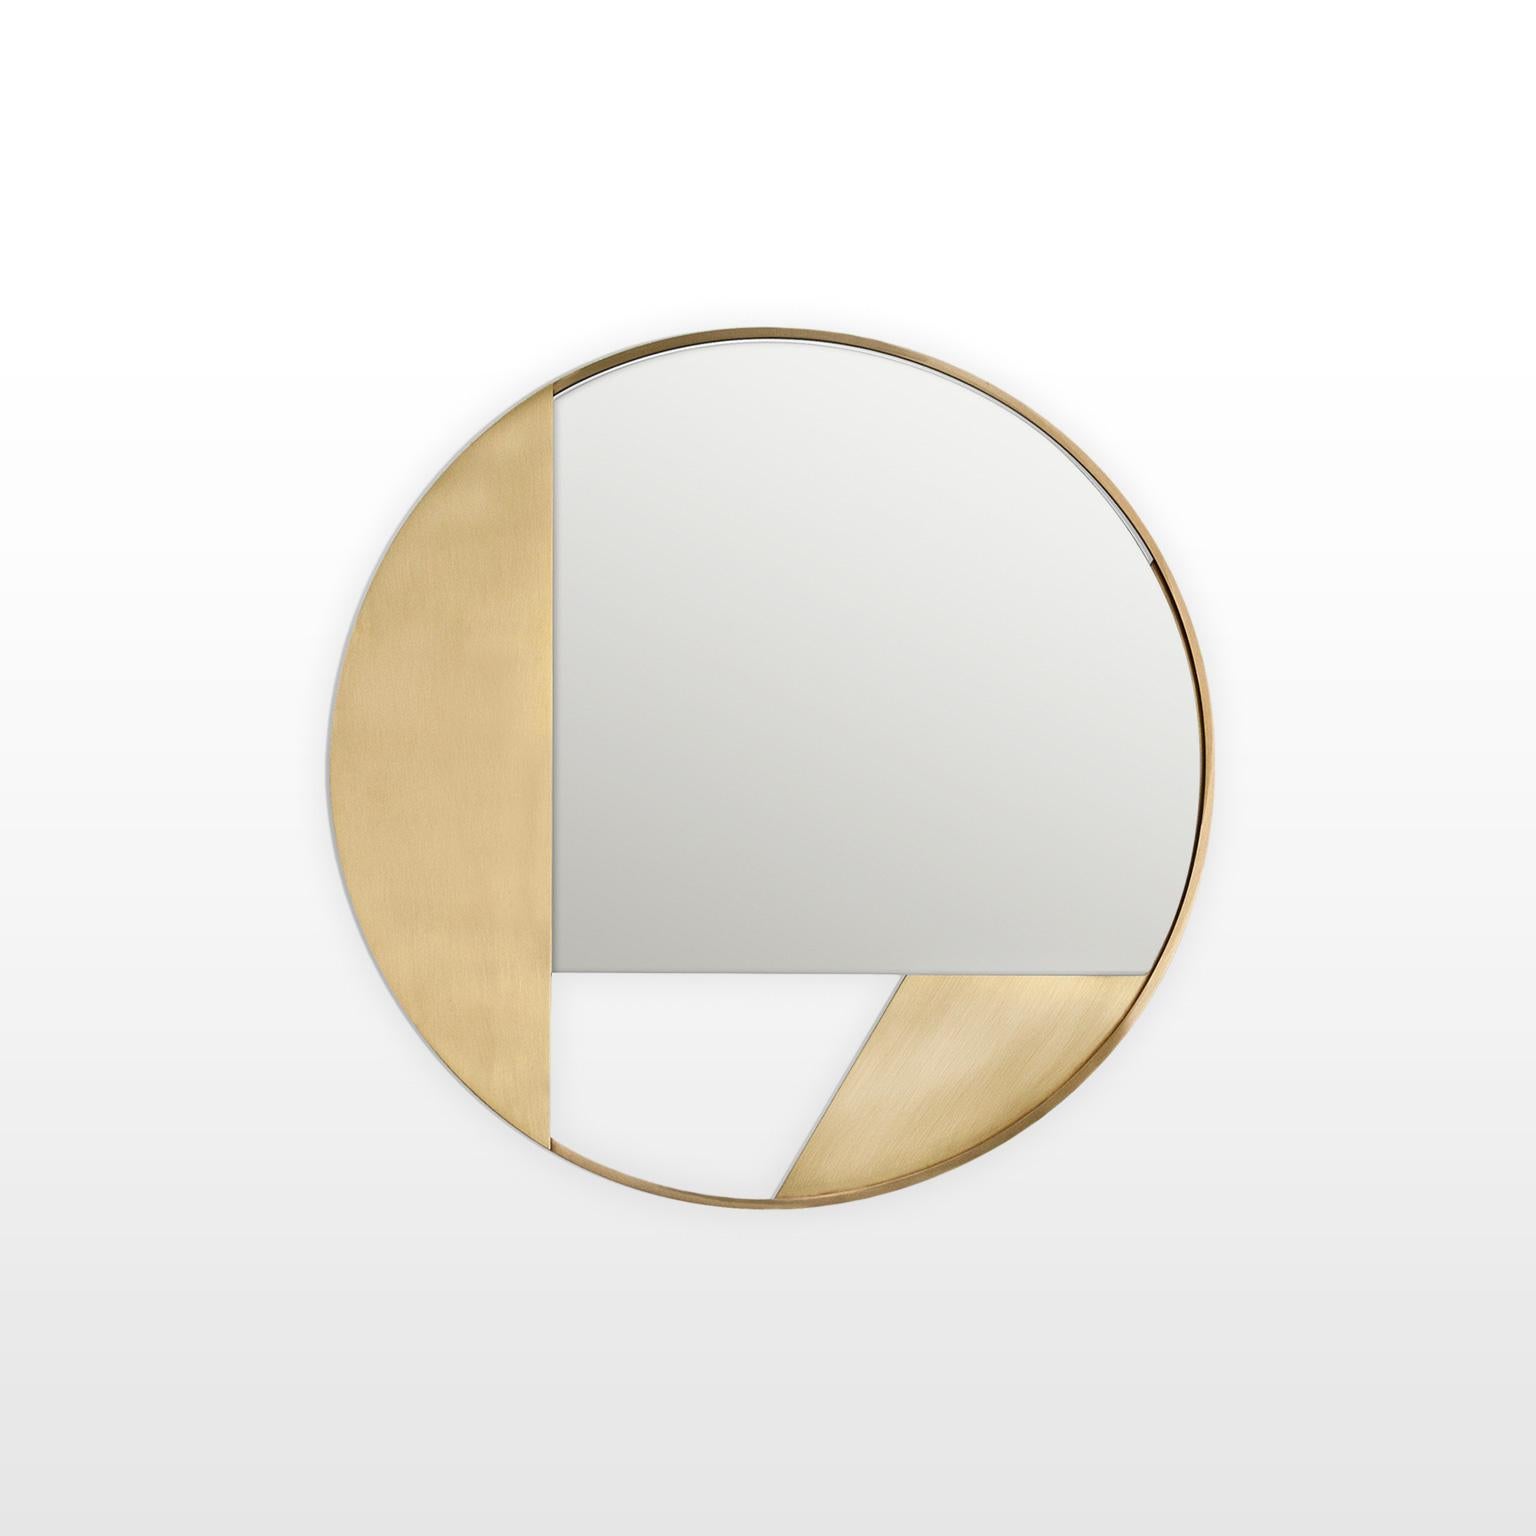 Revolution V3 is a 21st Century mirror of 55 cm diameter, made by Italian artisans in different shades and colors. The piece is manufactured in a limited edition of 1000 signed and progressively numbered examples. It is part of the collectible